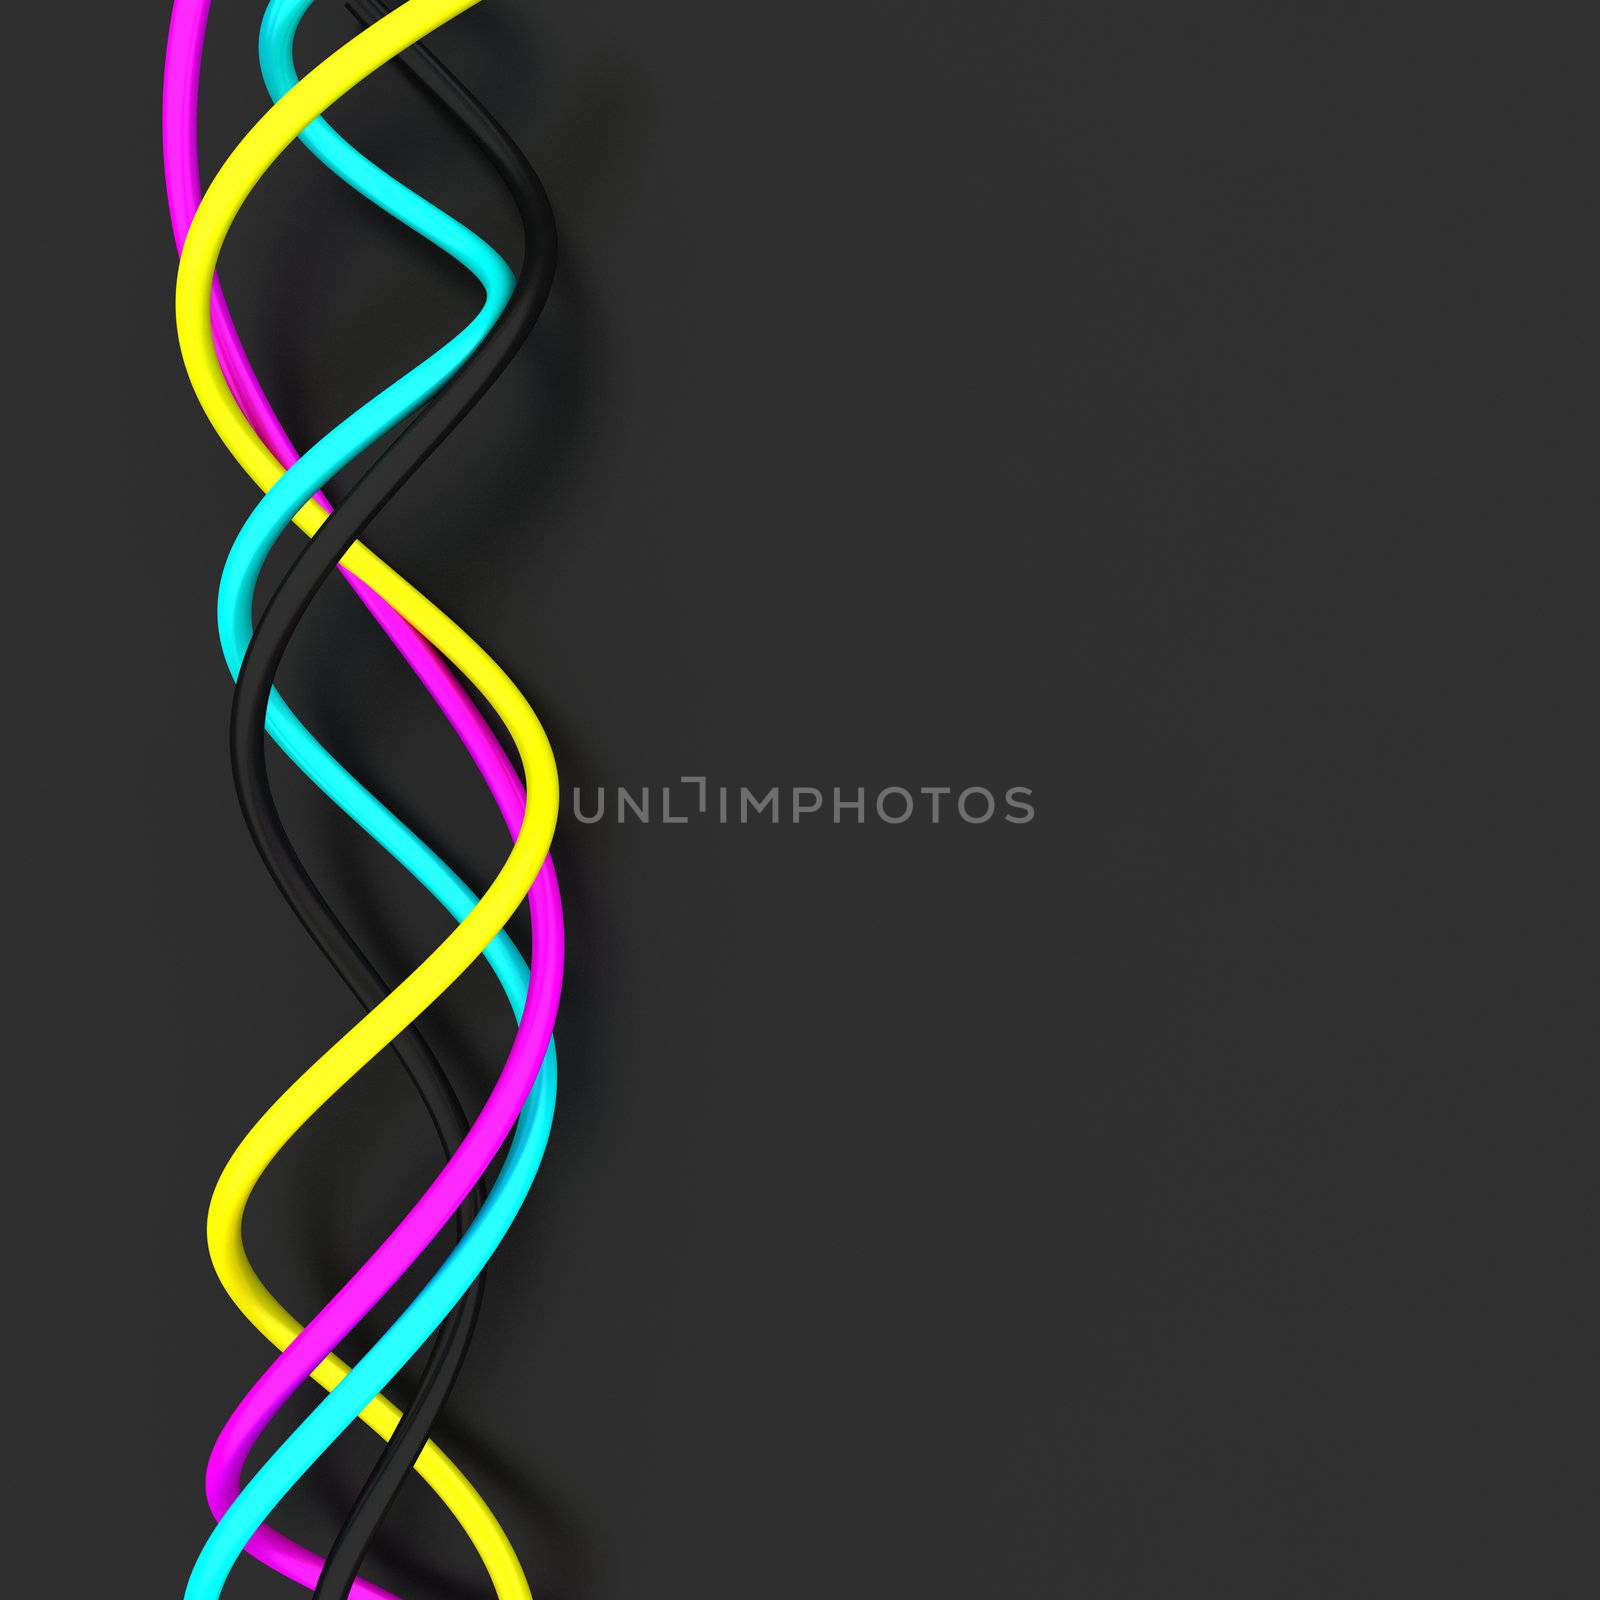 Spirals of cmyk colors on the black background